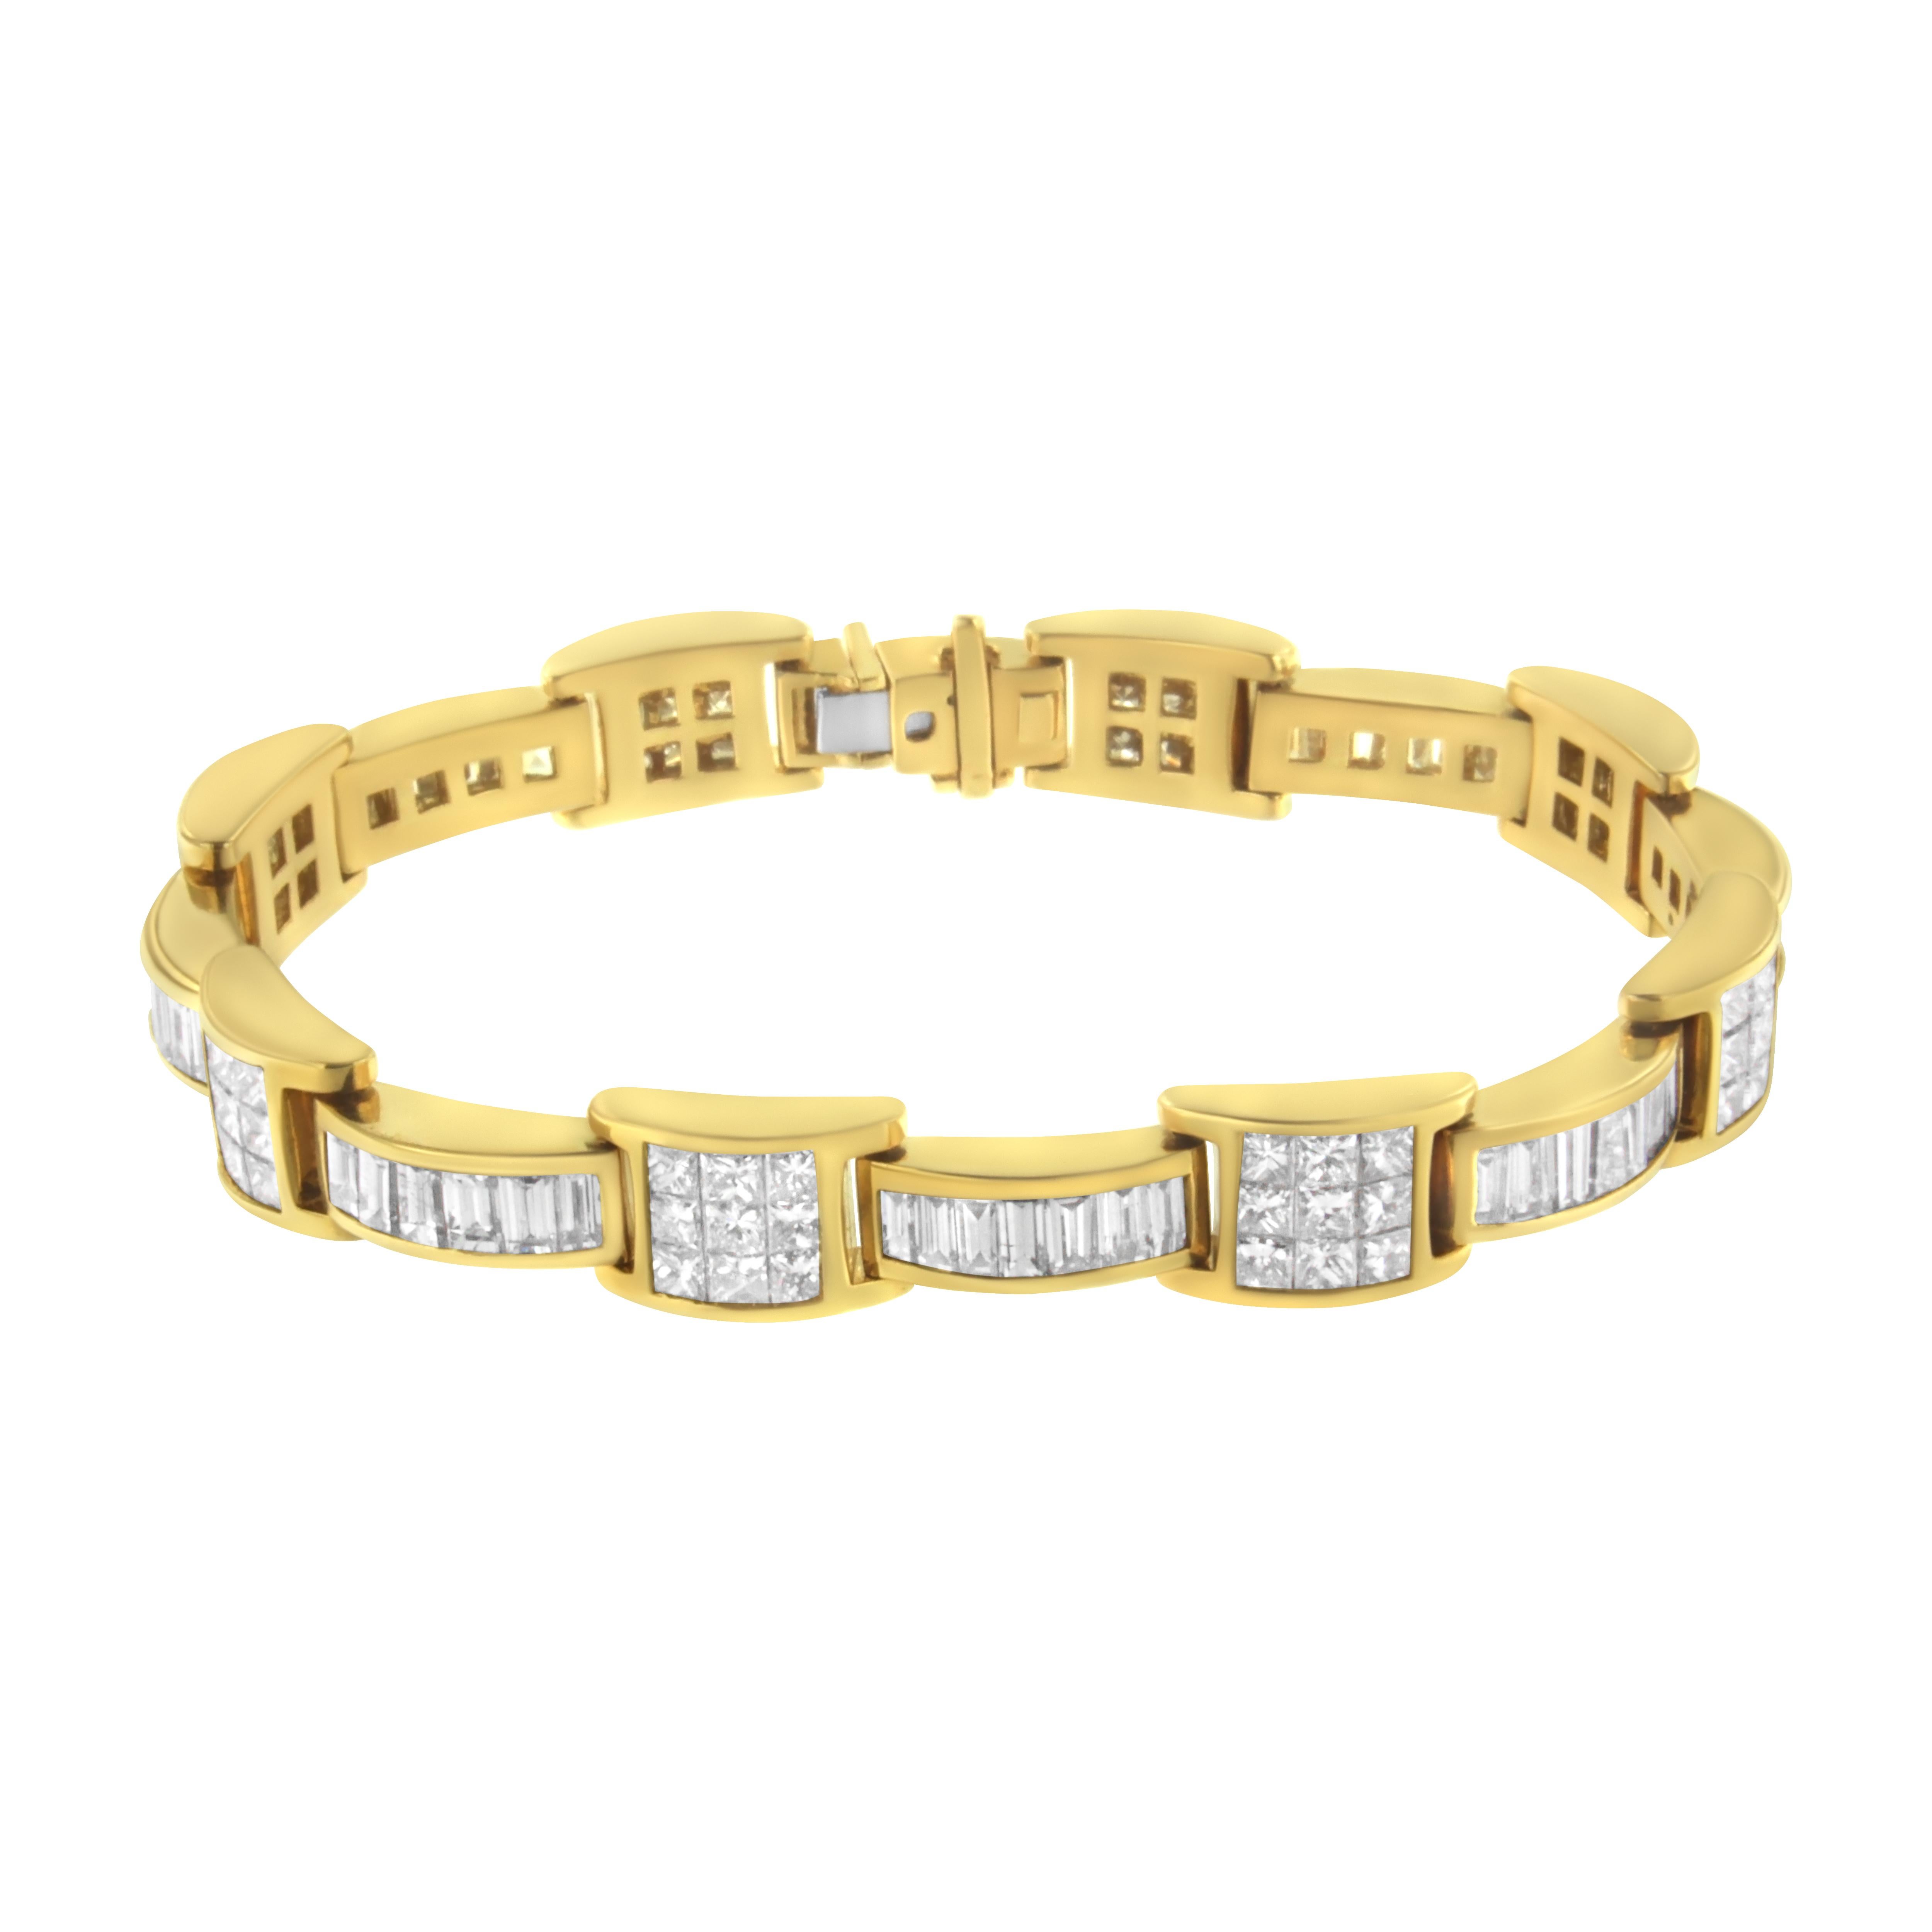 A glossy 14 karat yellow gold band is the perfect backdrop for over 10 carats of princess cut and baguette cut diamonds, linked together in two distinctive geometric shapes. This piece is equally as stunning when worn for a special occasion or every